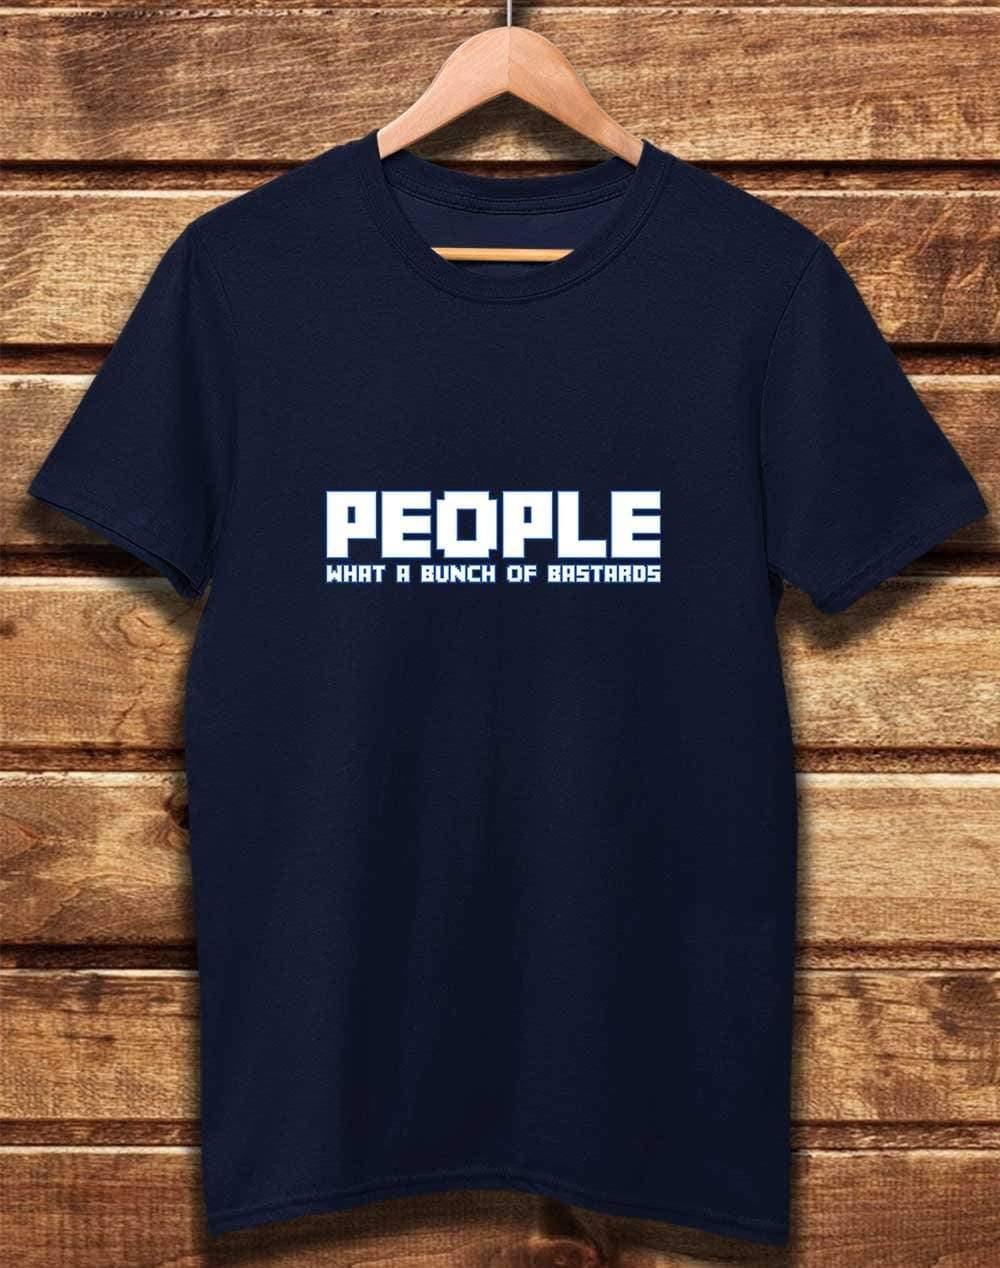 DELUXE People = Bastards Organic Cotton T-Shirt XS / Navy  - Off World Tees